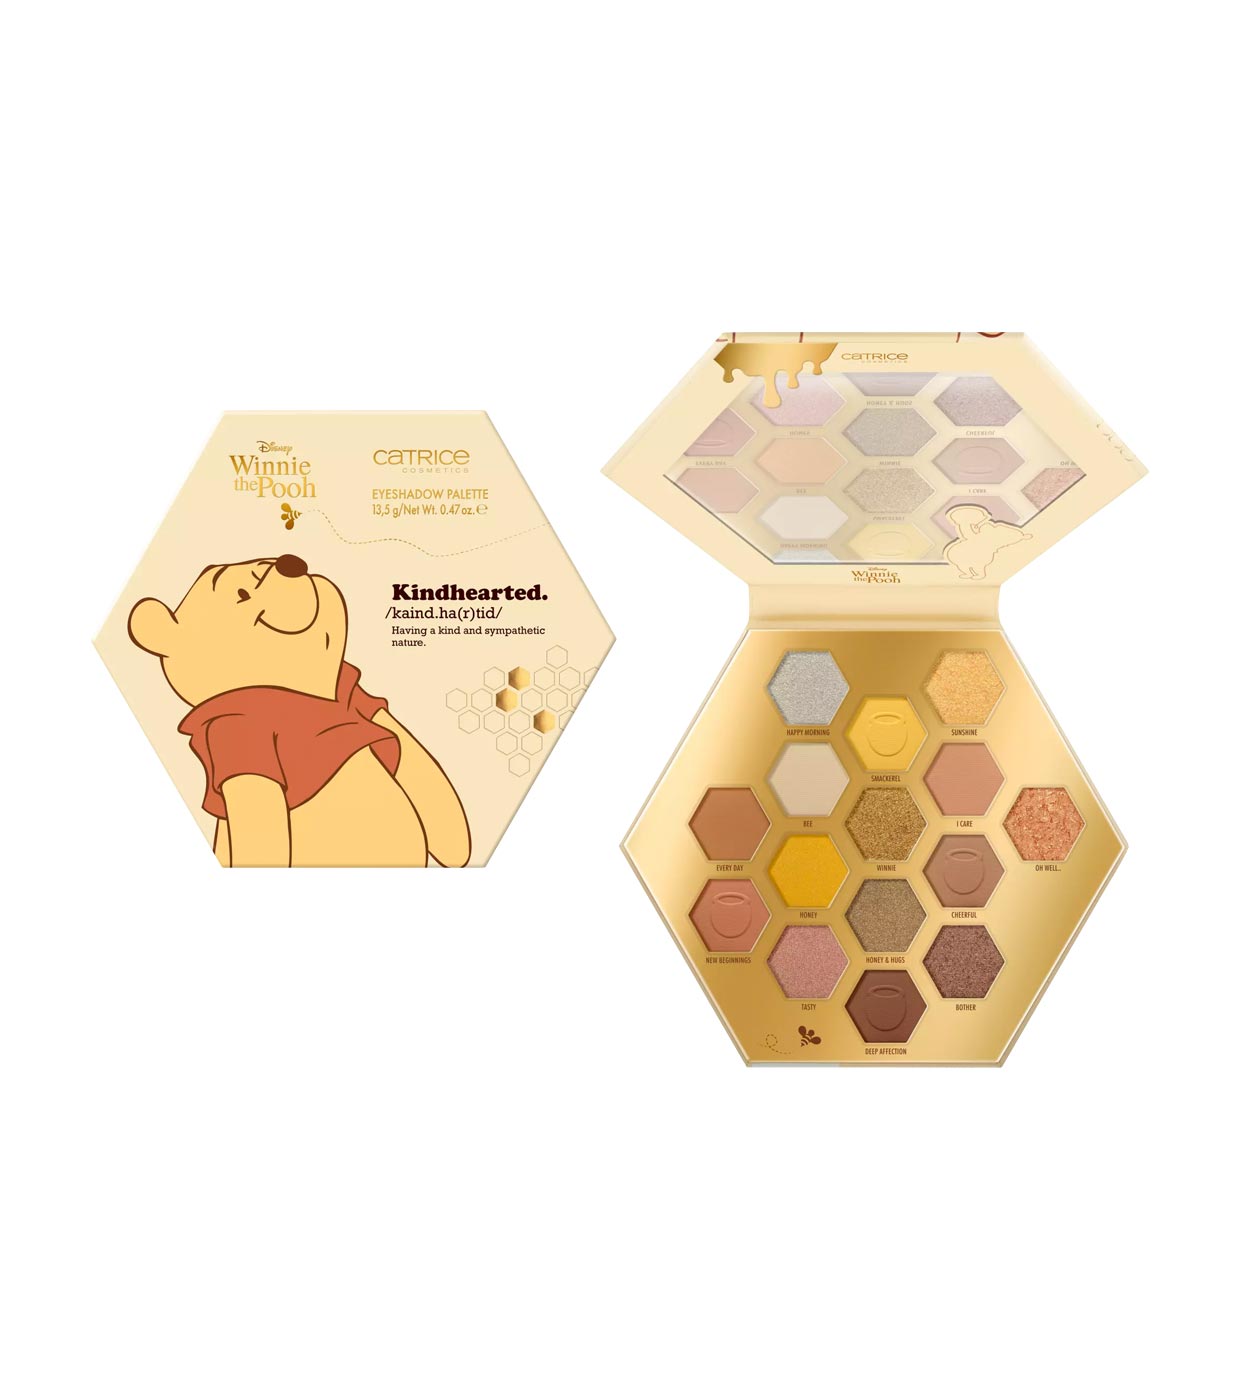 - As *Winnie - Bee 010: Palette Buy | - Eyeshadow Maquillalia Pooh* the Catrice Sweet Can